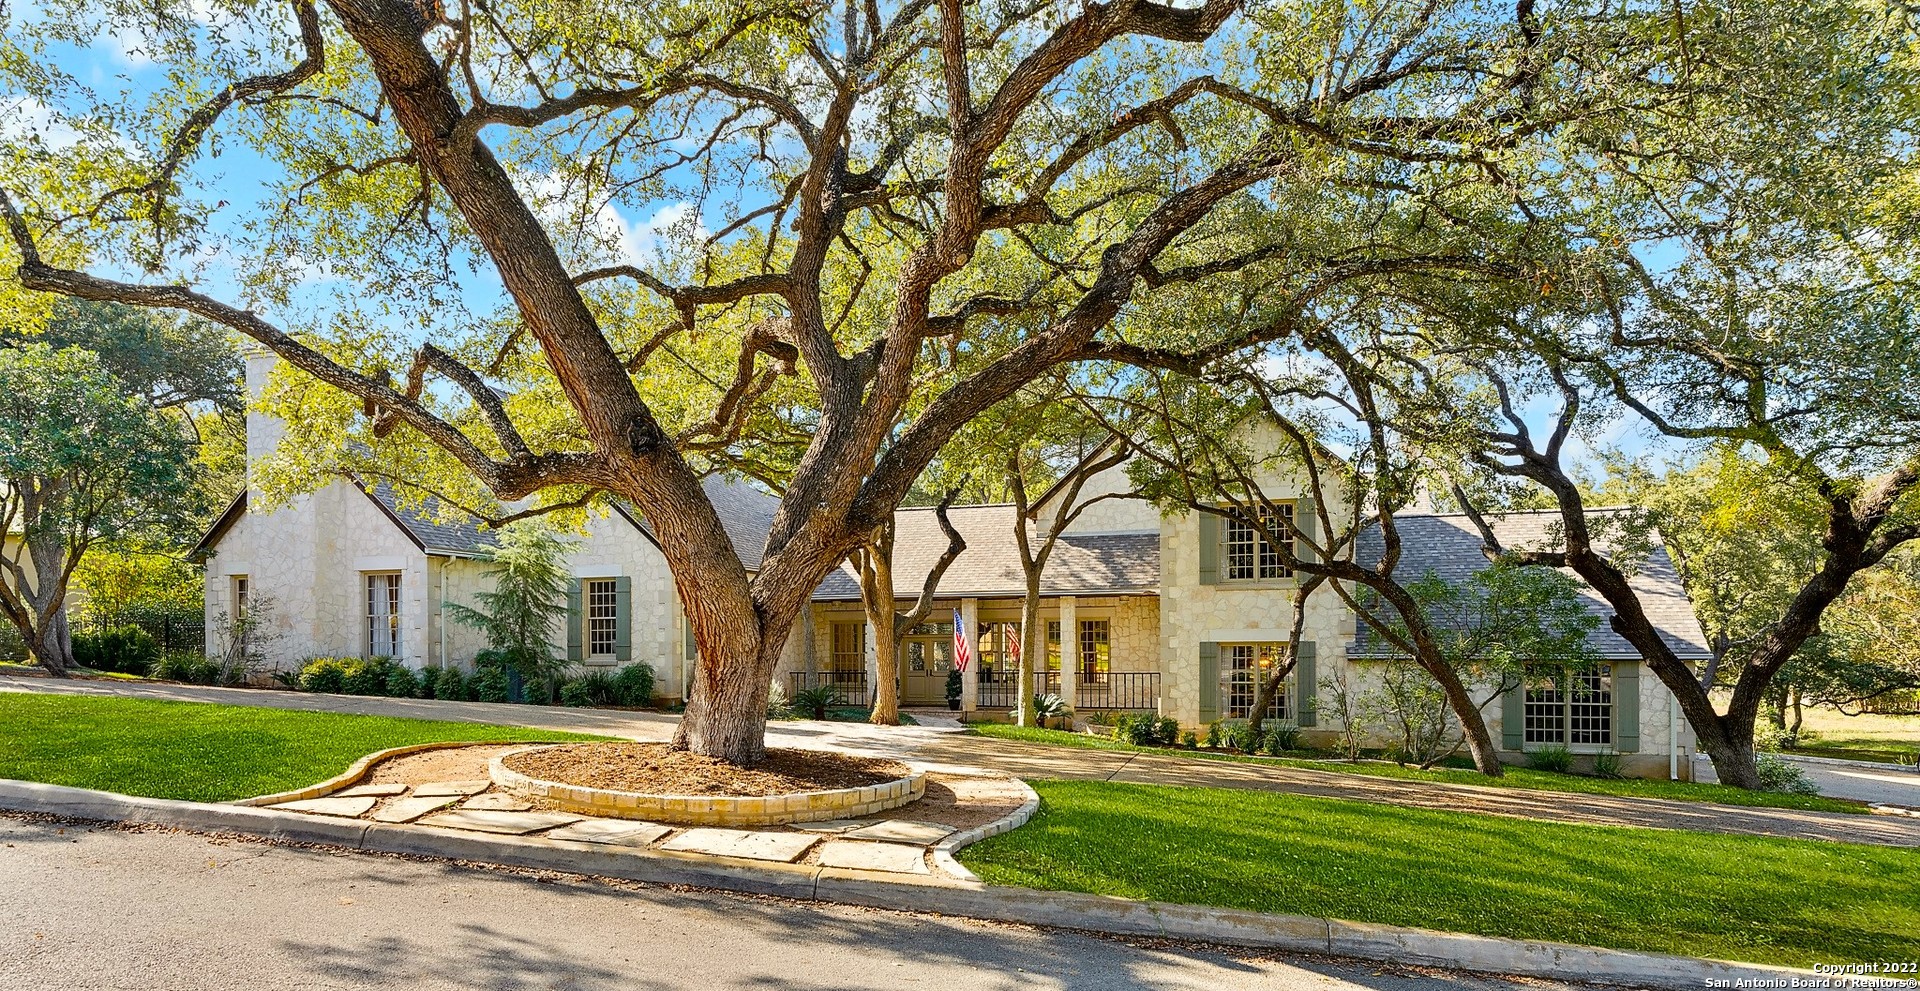 RARE FIND! This renovated Hill Country- style estate shines with understated elegance & is conveniently situated on a .92 acre tree-studded lot in the heart of the city on exclusive Parman Place.  Upon entry - you will notice the stunning architectural details at every turn to include 25-foot beaded board cathedral ceilings; leaded glass front door and transom windows over most all interior doors; Marvin wood, divided light windows; rich, quality wood trim, cabinets and paneling and rooms that showcase grand space & scale. The chef's kitchen features a newer (3y) Subzero fridge/freezer & appliances, walls of gorgeous cabinetry and miles of granite countertops and is open to a sunny living space with fantastic limestone walls and views of the garden.  A coveted secondary suite downstairs is near the kitchen & makes for the perfect guest hideway.  The nearby dining room provides a built-in breakfront with counter and cabinets for abundant storage.  Your guests can flow right to the kitchen, family and dining spaces or left to the grand living room with bar area and floor to ceiling limestone fireplace or straight outside to one of the many patio areas.  Stop by the executive study - complete with rich wood built-ins and closet with surprise inside.  Continue past the study to the stately primary suite with fireplace and a spa-bath sure to please with two vanities, soaking tub, roomy shower & two closets. Enjoy the private patio outside the primary bath for your morning coffee or evening cocktails.  Please do notice that the lower level also provides two half baths for convenience.  Upstairs delivers another living area and two very spacious bedrooms.  To the left is a suite with a huge closet and balcony overlooking the backyard and to the right is an enormous bedroom with jack & jill bath.  Upgrades include wood & travertine flooring (no carpet except primary closets); appliances; countertops; bathrooms and newer HVAC units. Peaceful paradise awaits outback with multi-patios, pergola-covered hot tub; no neighbor to the right (ownership of nearly half that lot is included) and a greenbelt.  Realize plenty of room to design your dream pool.  Large, fenced dog area or garden area to the left of hot tub. Parking is a breeze with your side-load, oversized three car garage and long, graceful circle drive.  Come for a visit and plan plenty of time to be amazed.